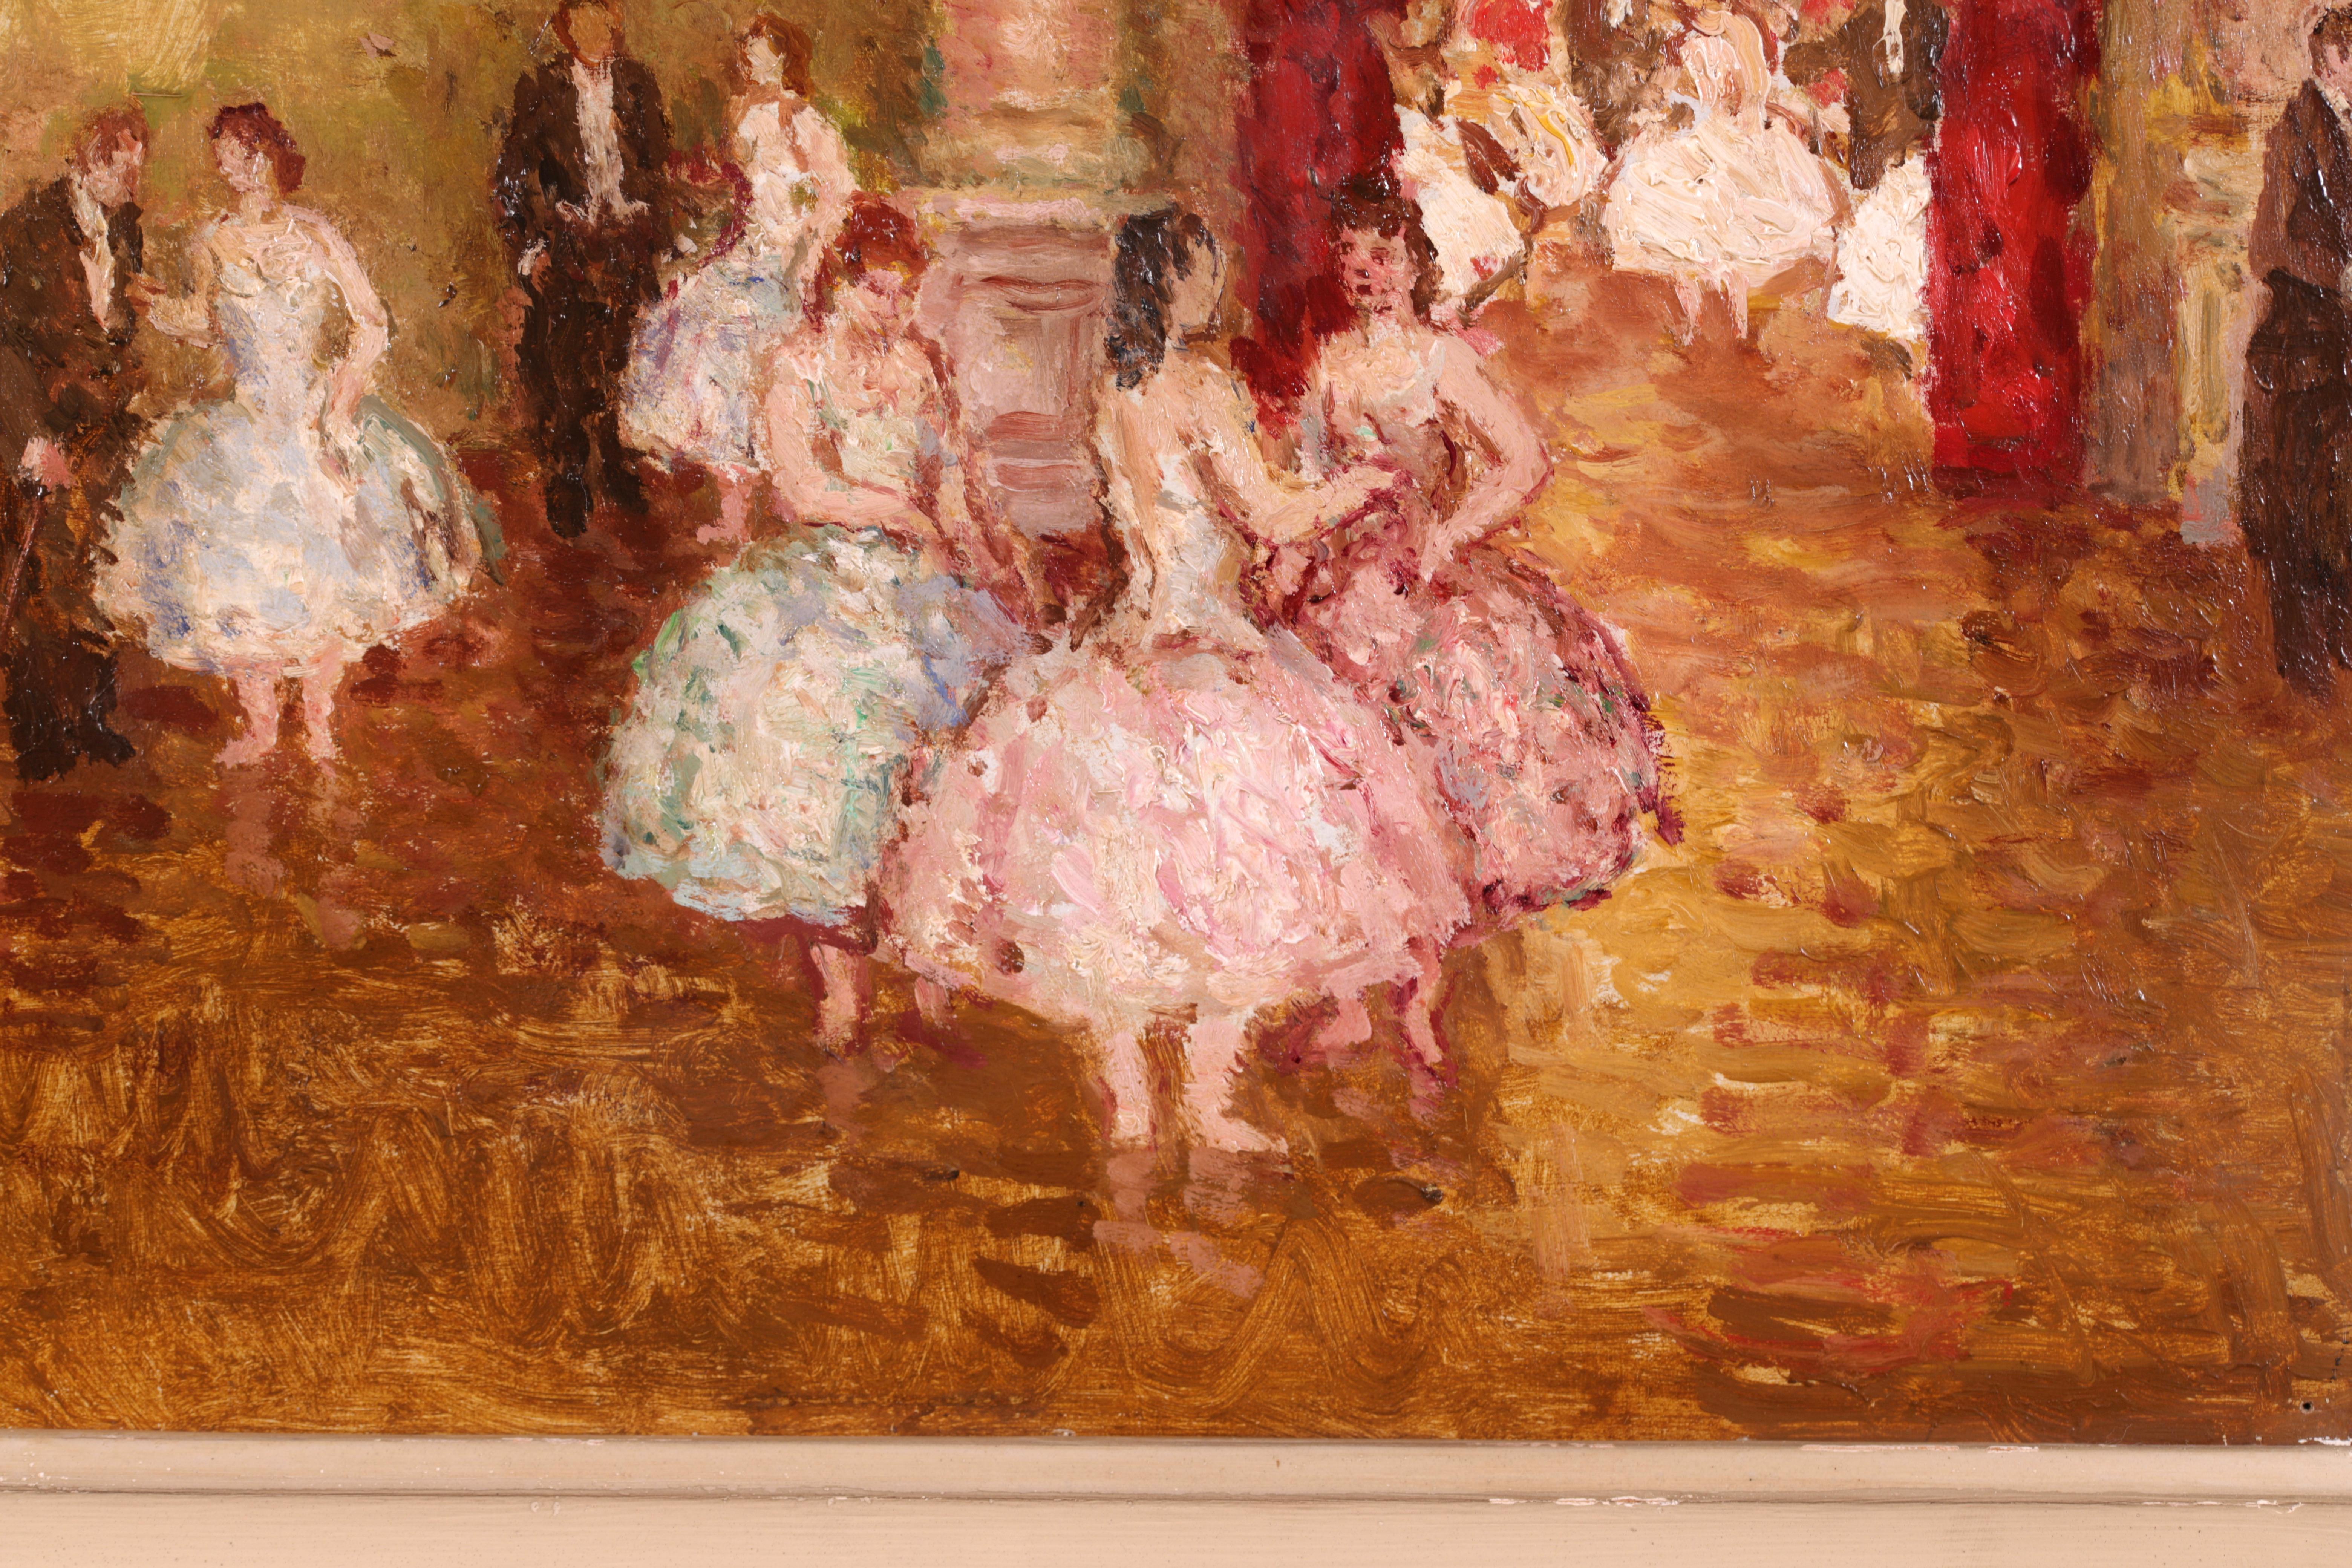 Danseurs au Foyer - Post Impressionist Oil, Figures in Interior by Marcel Cosson - Post-Impressionist Painting by Jean-Louis-Marcel Cosson